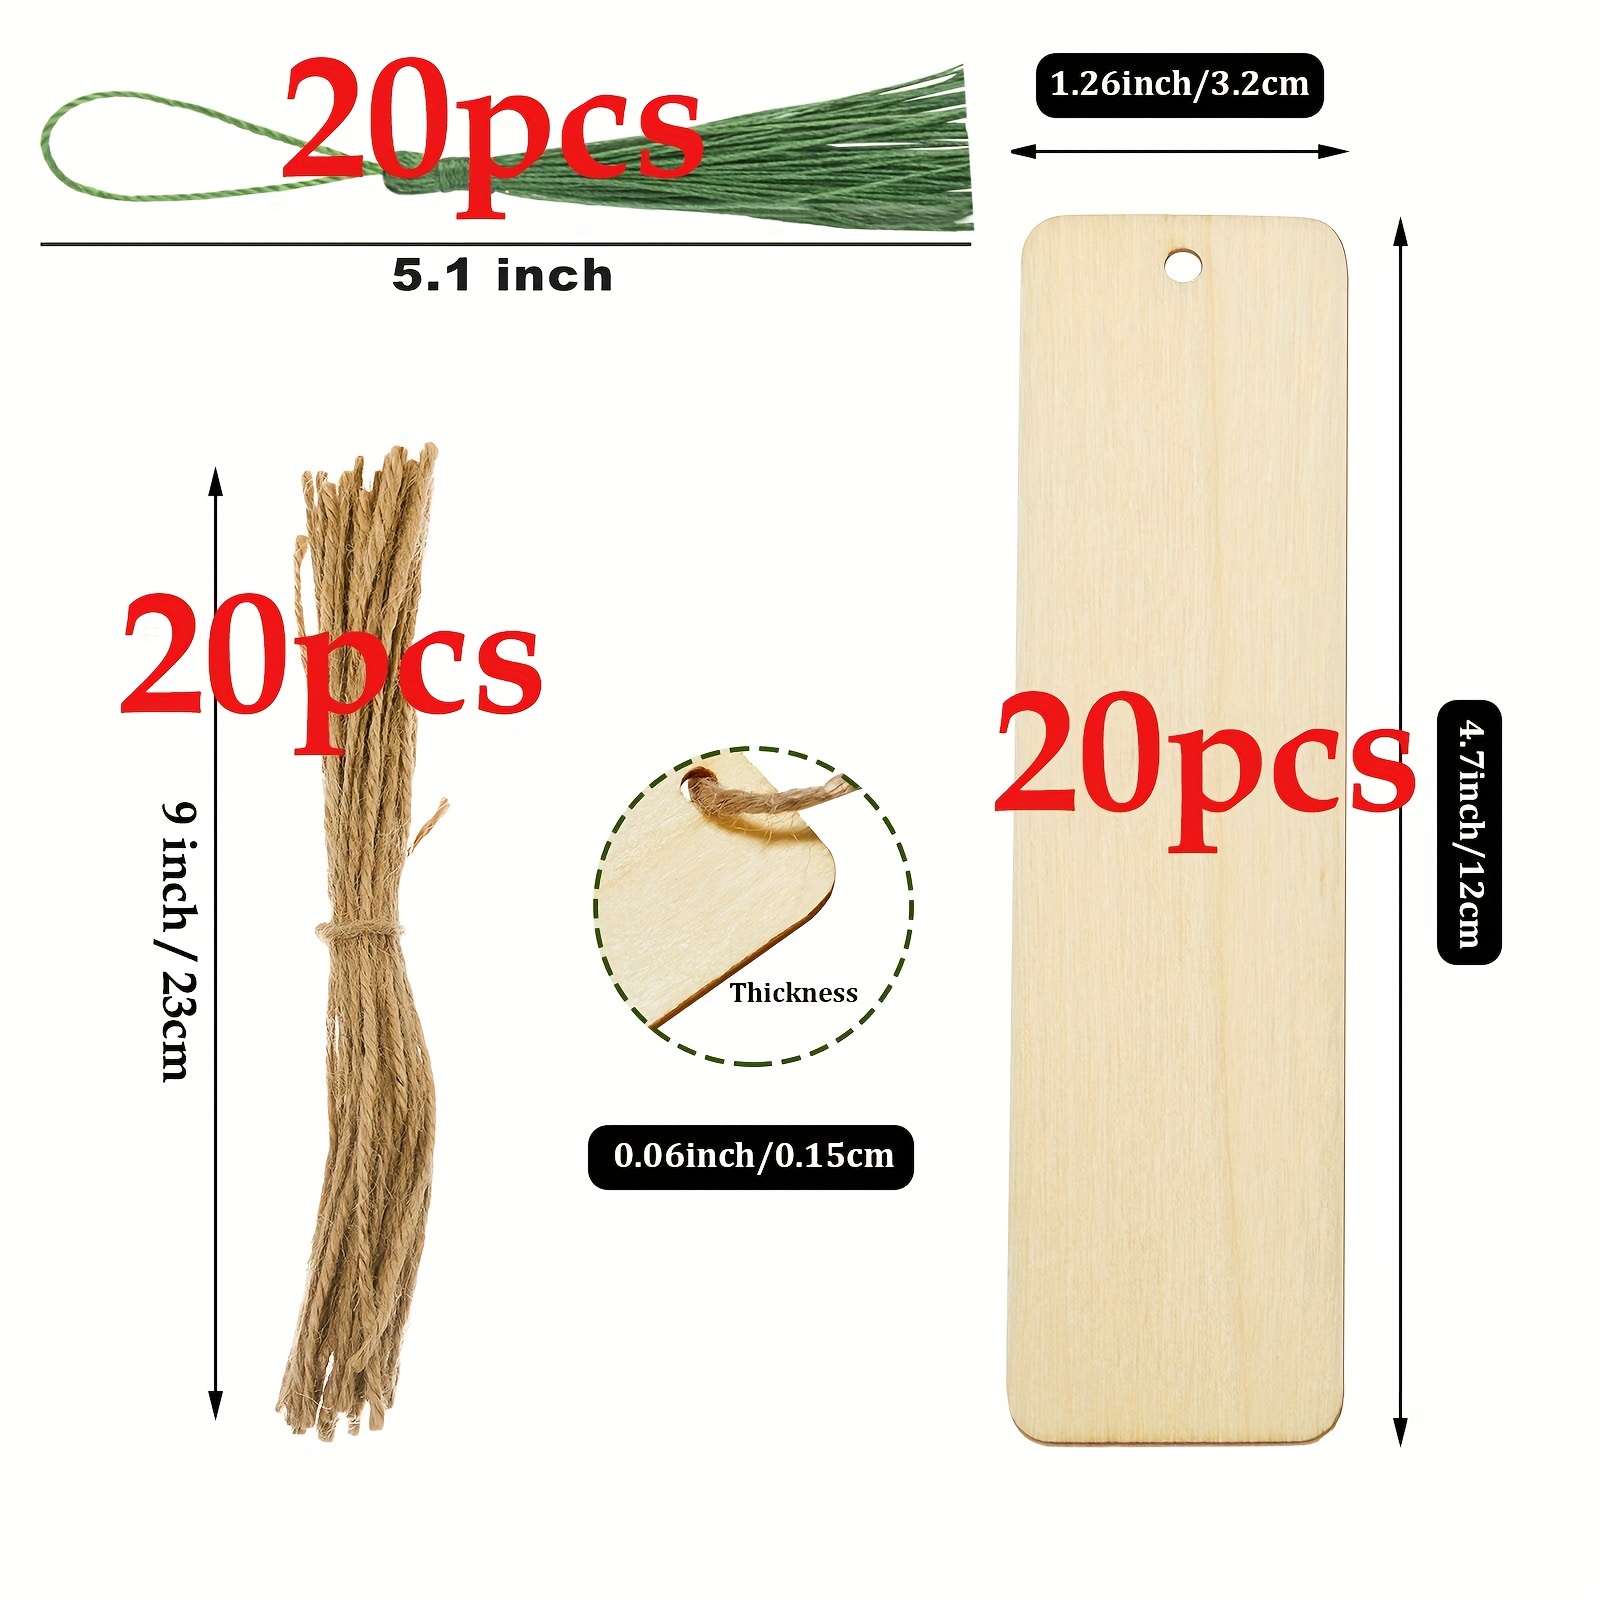 VILLCASE 20 pcs Wooden Blank Bookmark Blank Bookmarks to Decorate  Decorative Bookmark Unfinished Wooden Bookmarks DIY Book Page Marker Blank  Wooden